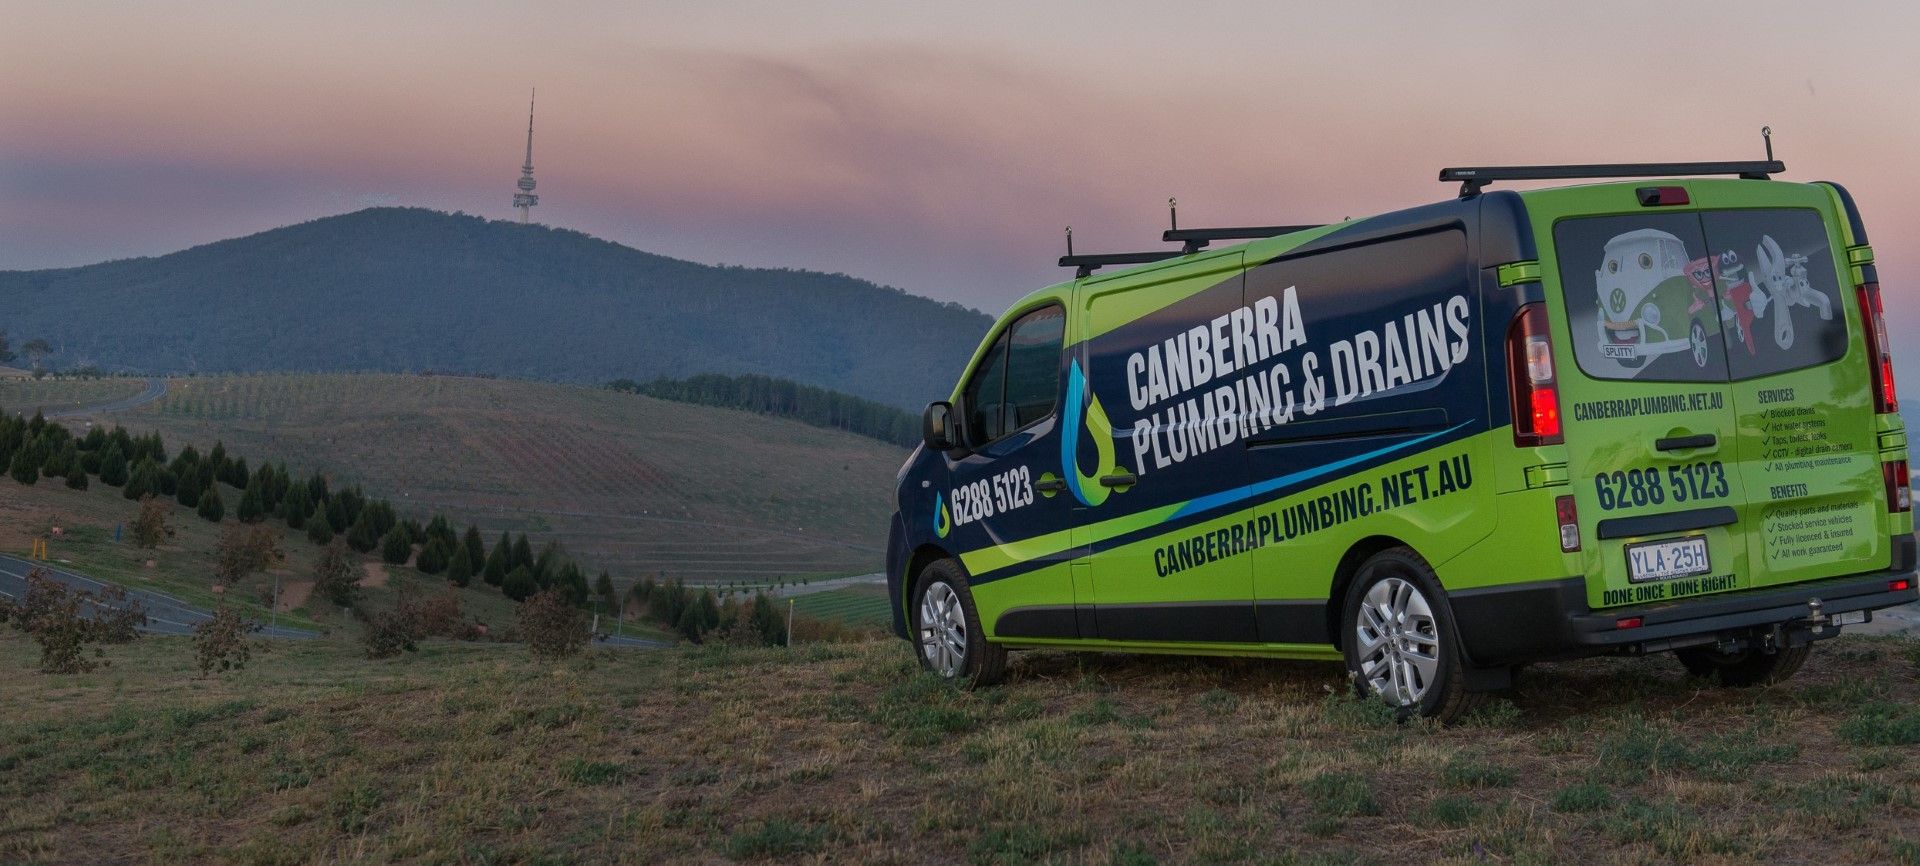 Plumber's van parked in Canberra with mountains in background.